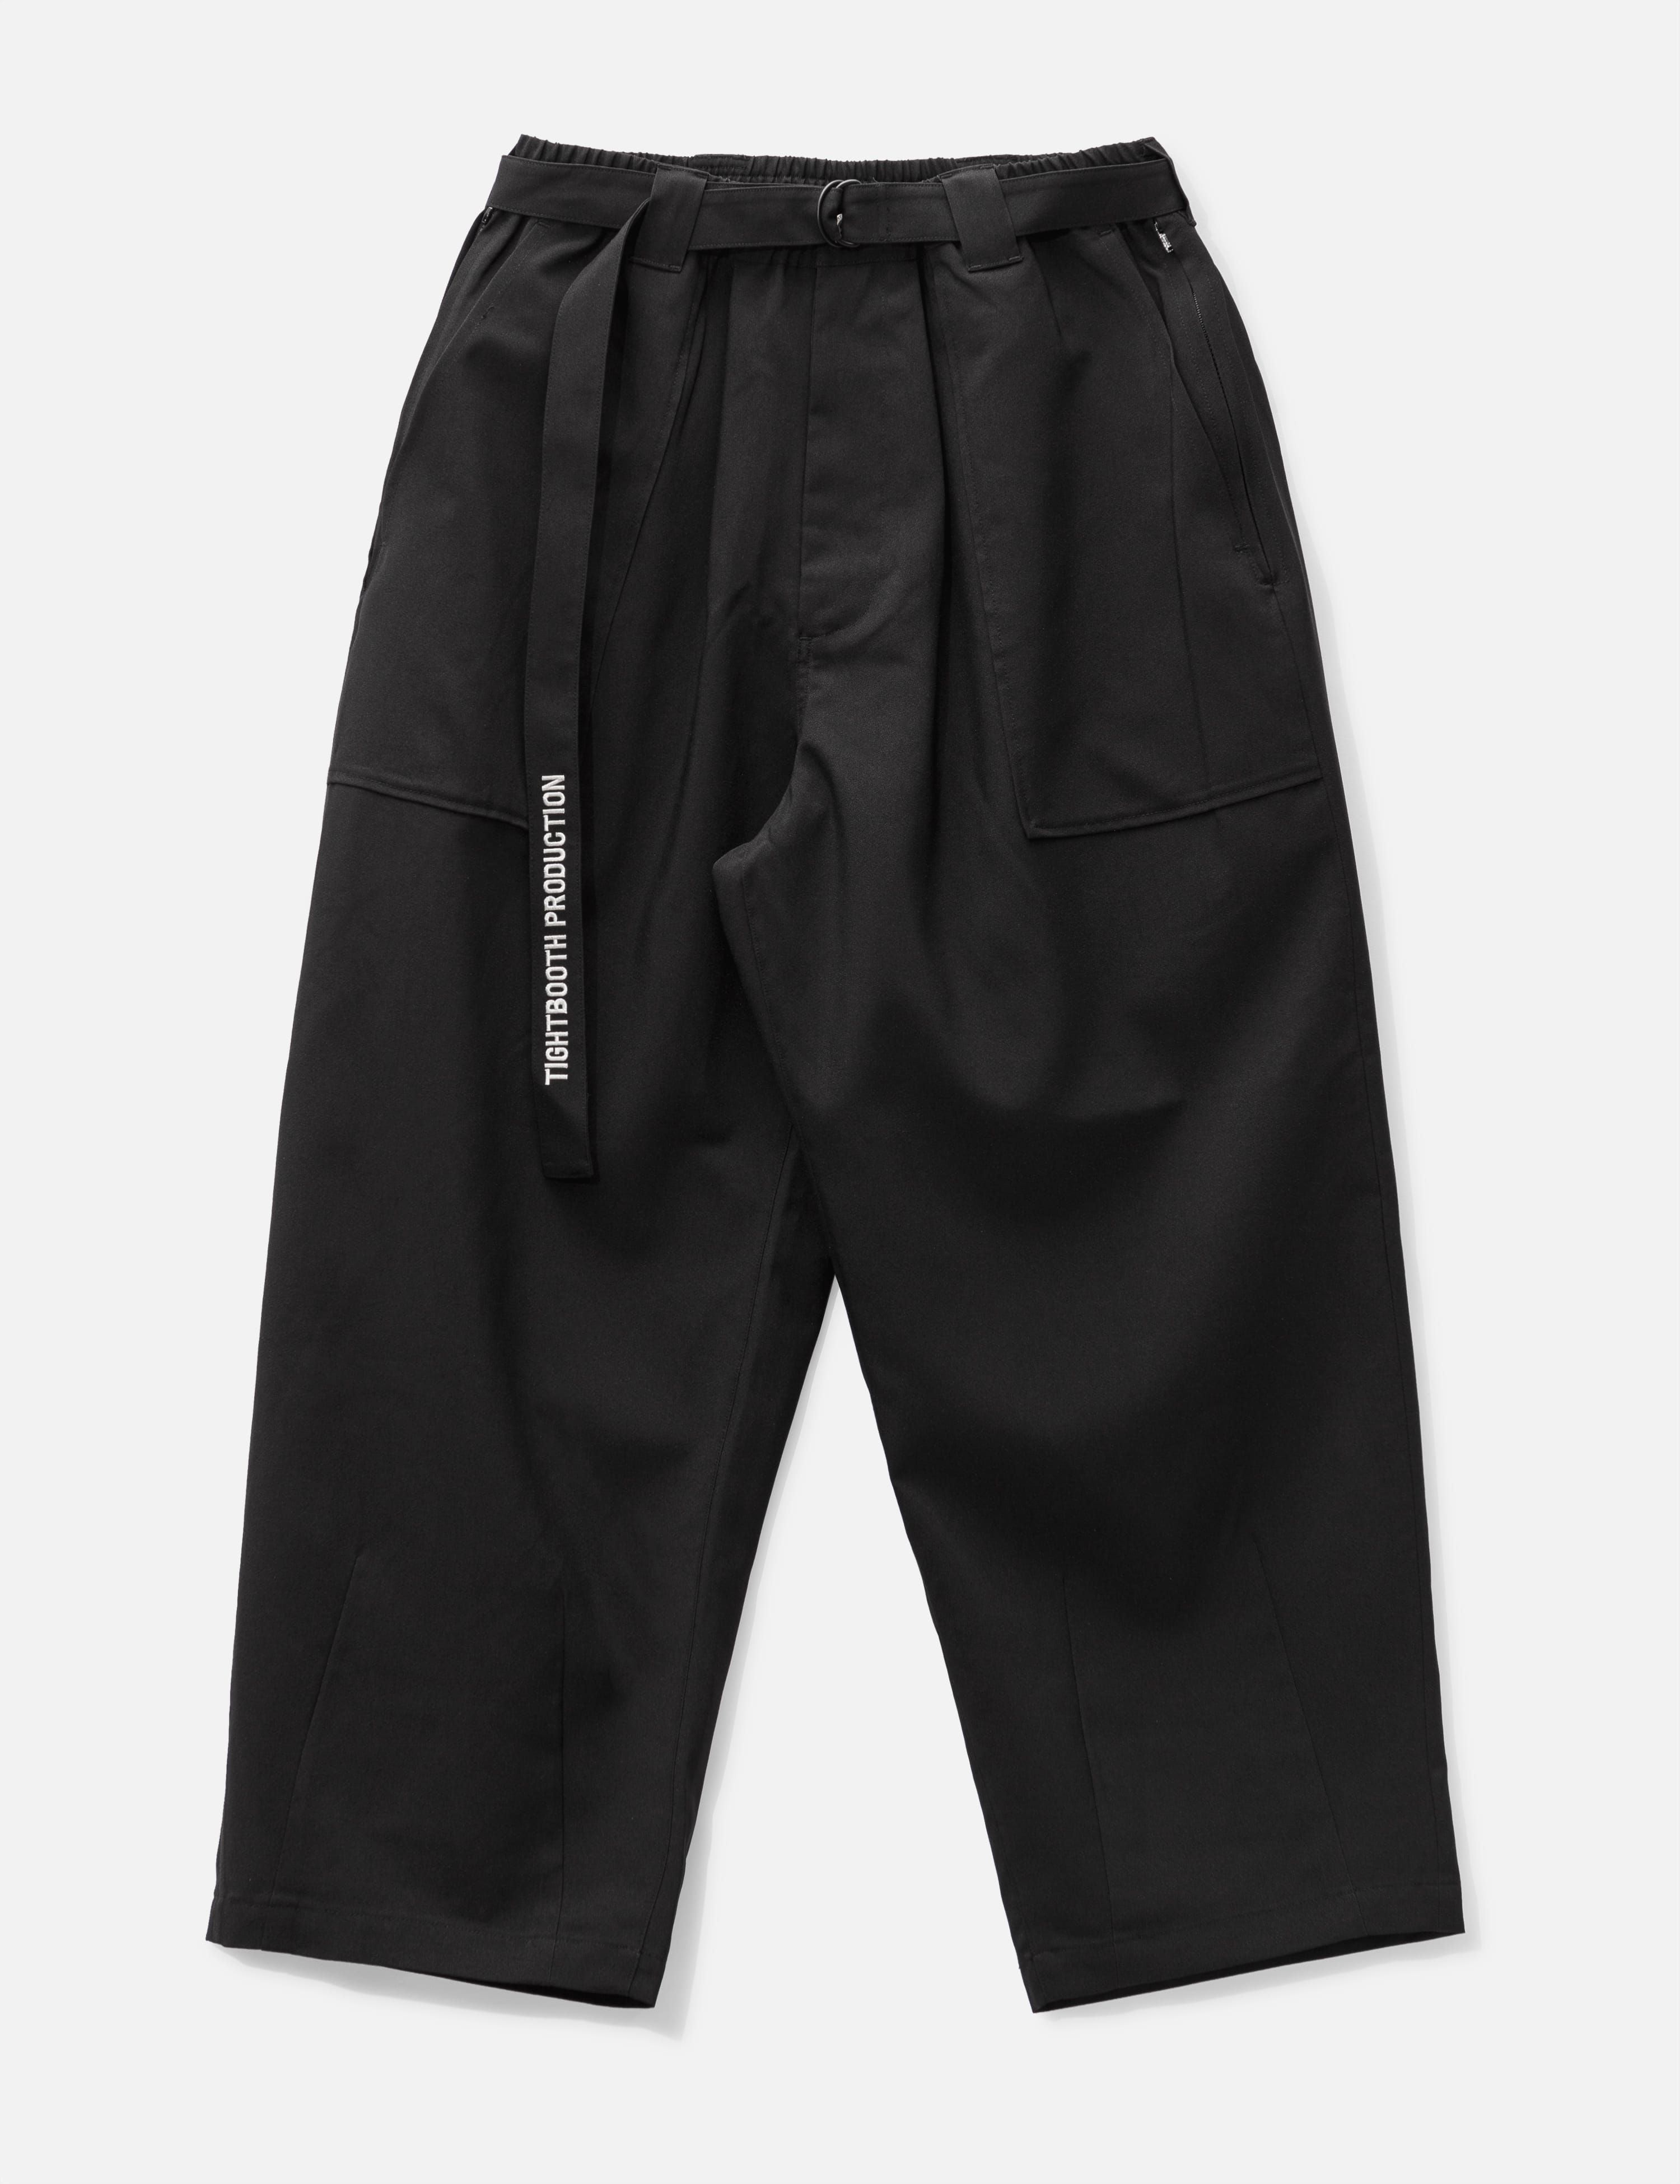 TIGHTBOOTH   Baker Baggy Slacks   HBX   Globally Curated Fashion